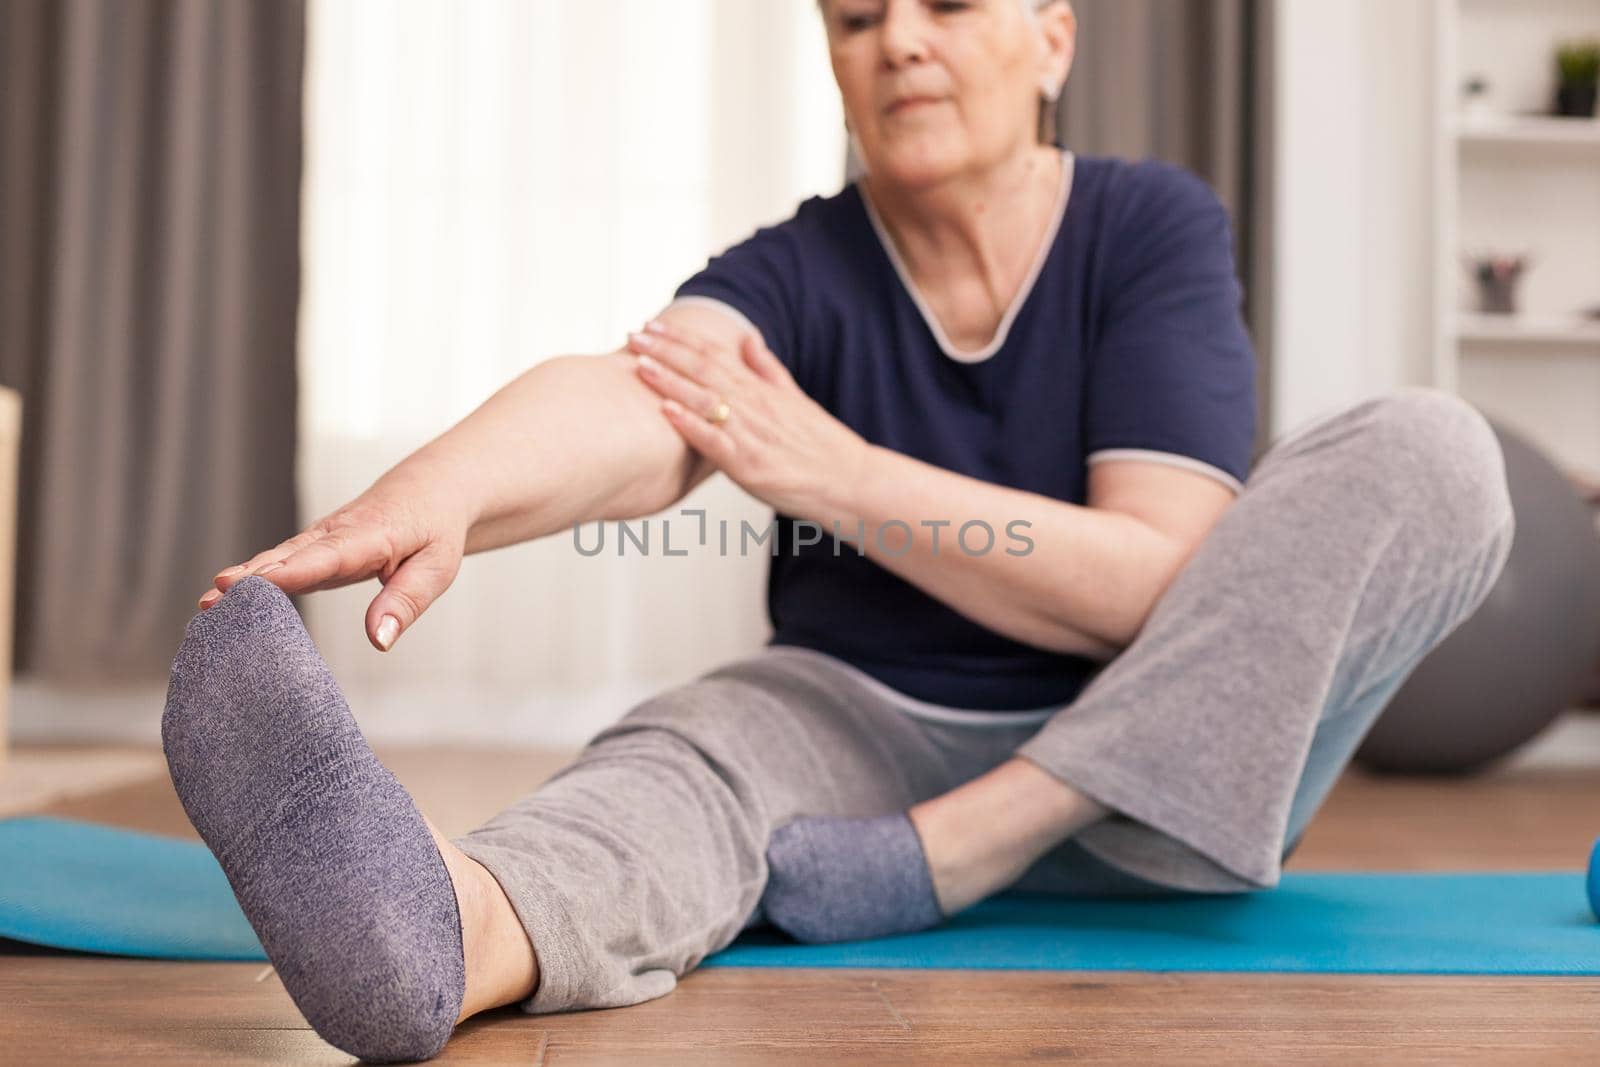 Modern grandmother doing stretching at home oon yoga mat. Old person pensioner online internet exercise training at home sport activity with dumbbell, resistance band, swiss ball at elderly retirement age